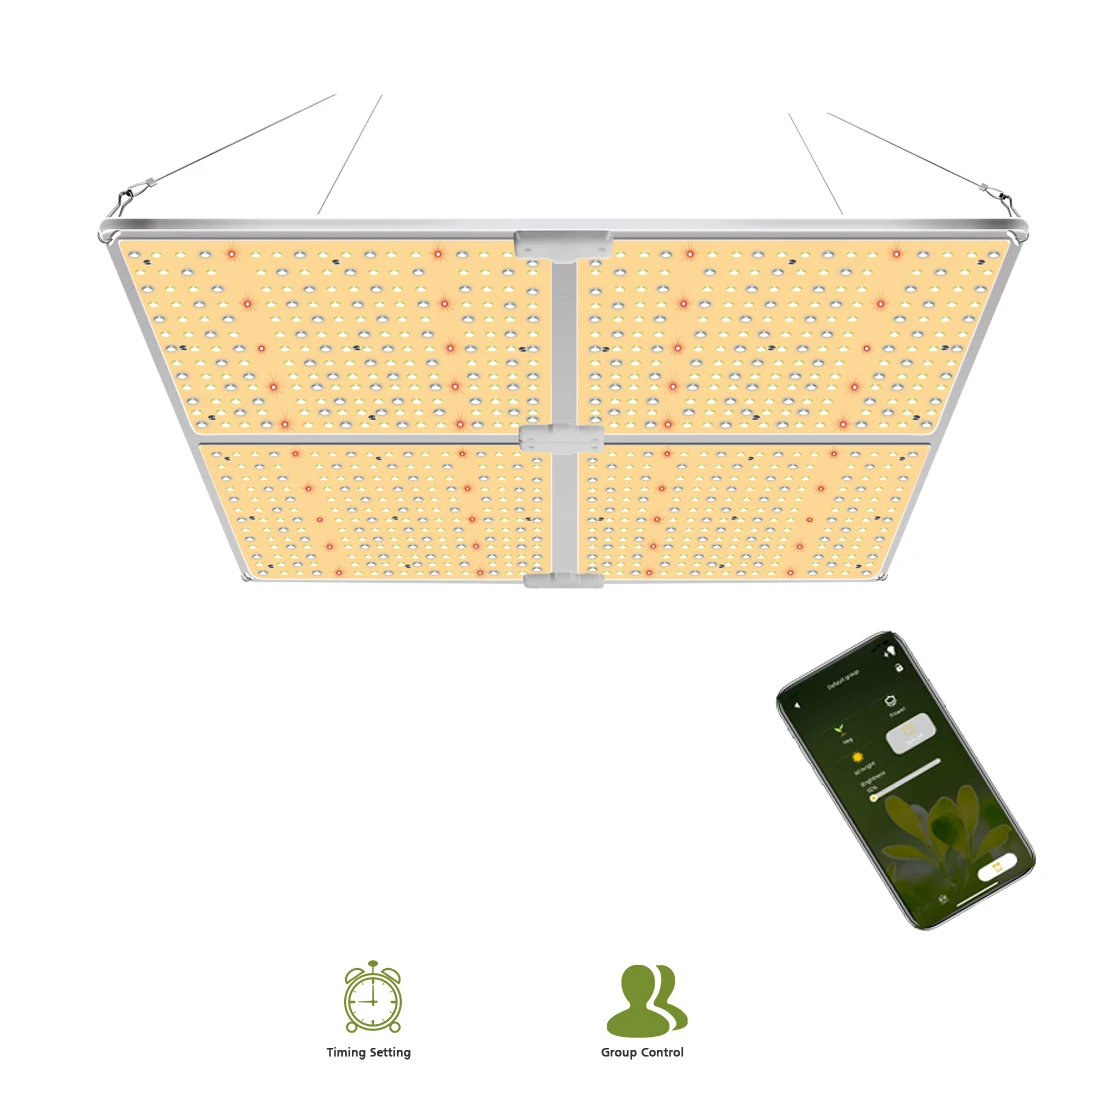 Free Shipping Stock In USA APP Group Control 600W 450w 220w 110w Daisy Chain Samsung Lm301b LED Grow Lights For Indoor Plants